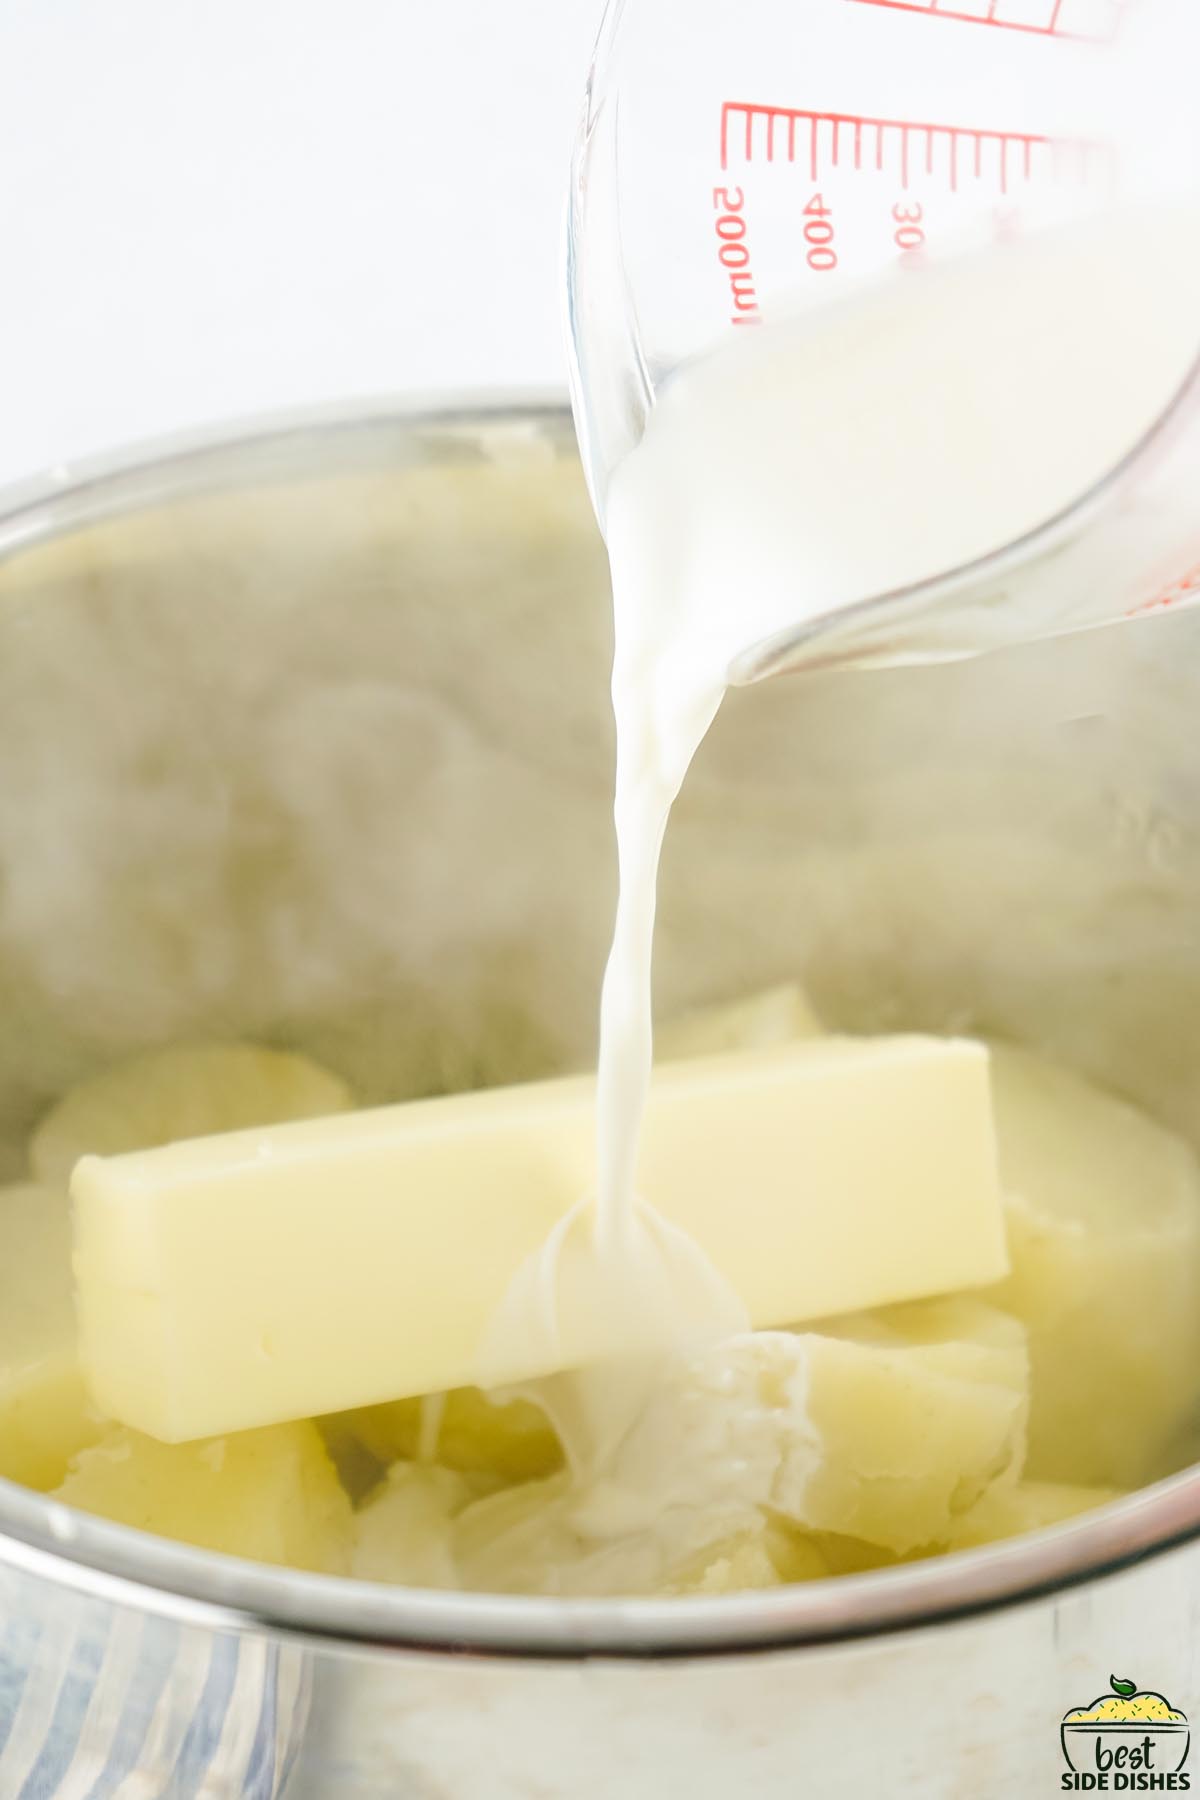 milk being poured on cooked potatoes and a stick of butter